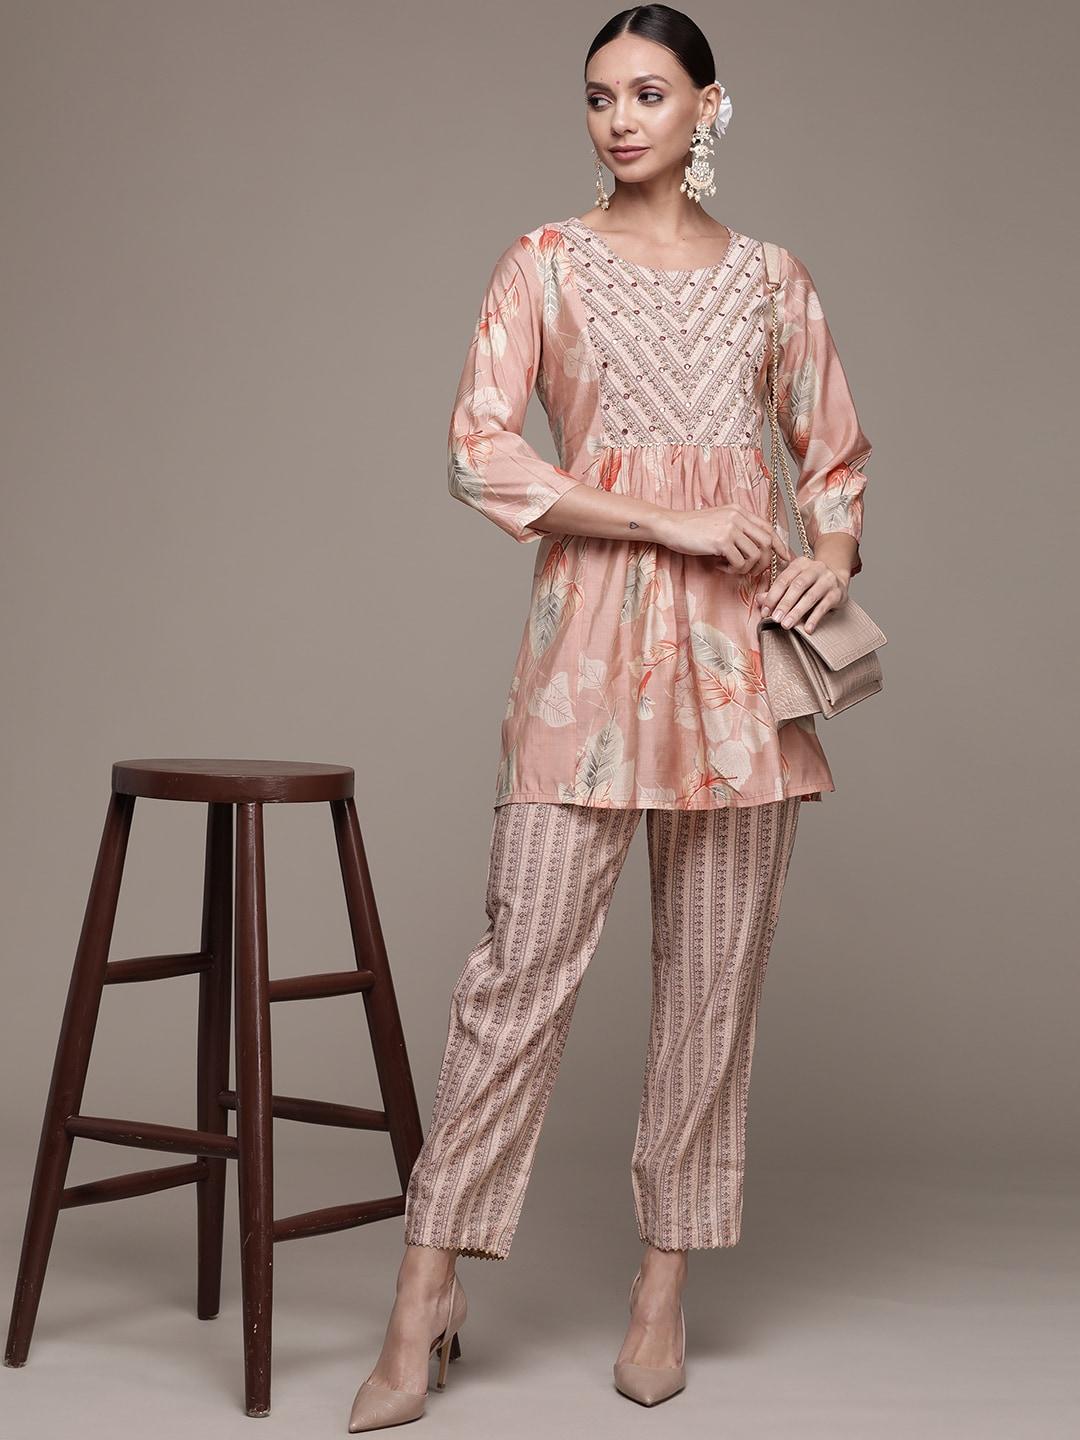 ishin-women-peach-coloured-floral-embroidered-beads-and-stones-kurti-with-trousers